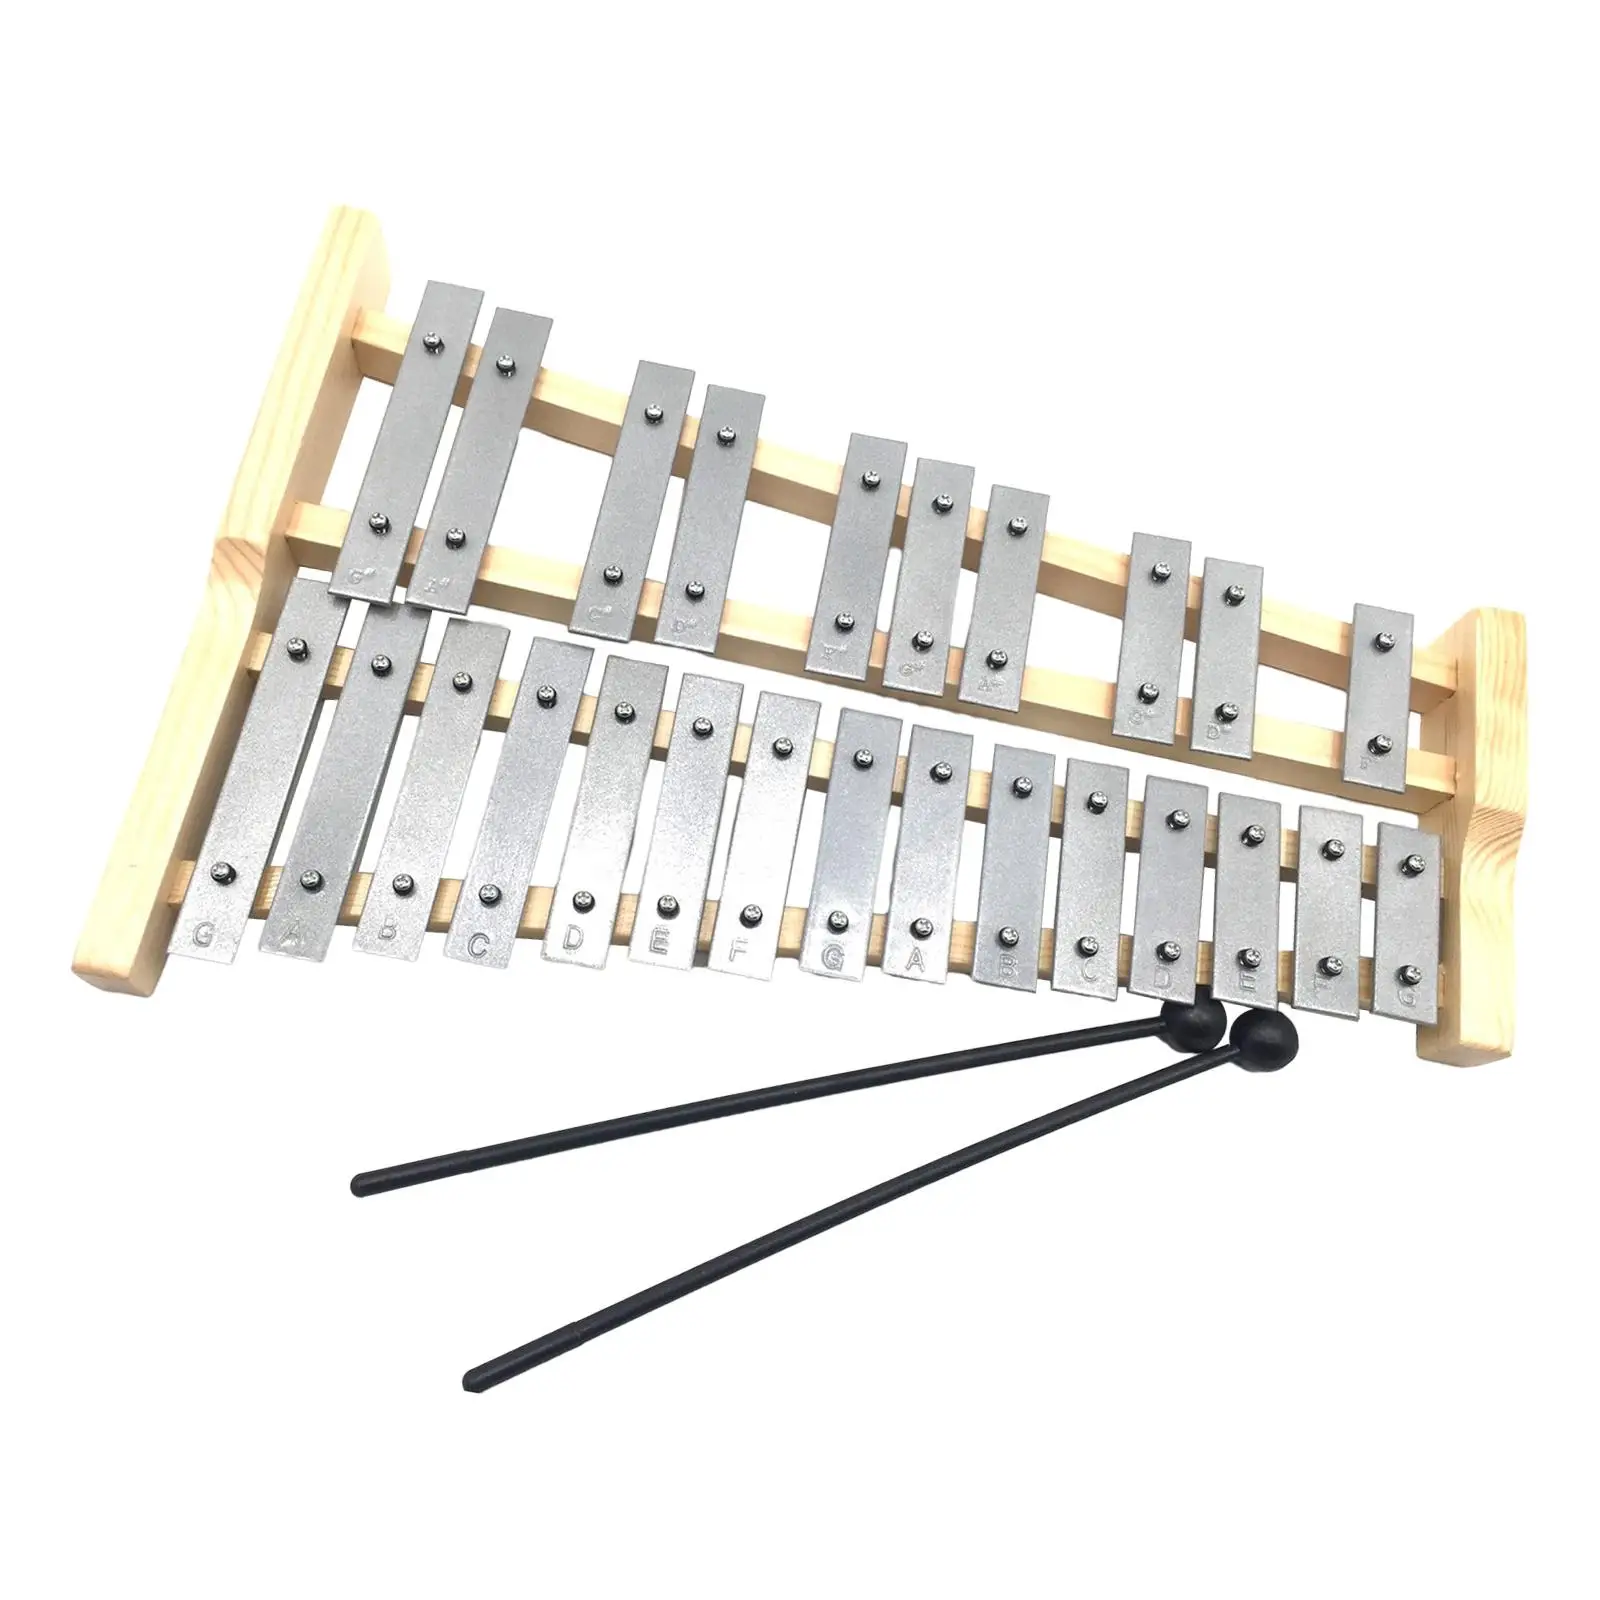 25 Note Glockenspiel Compact Professional for Kids Adults Wooden Frame Portable Xylophone Percussion Instrument with Mallets